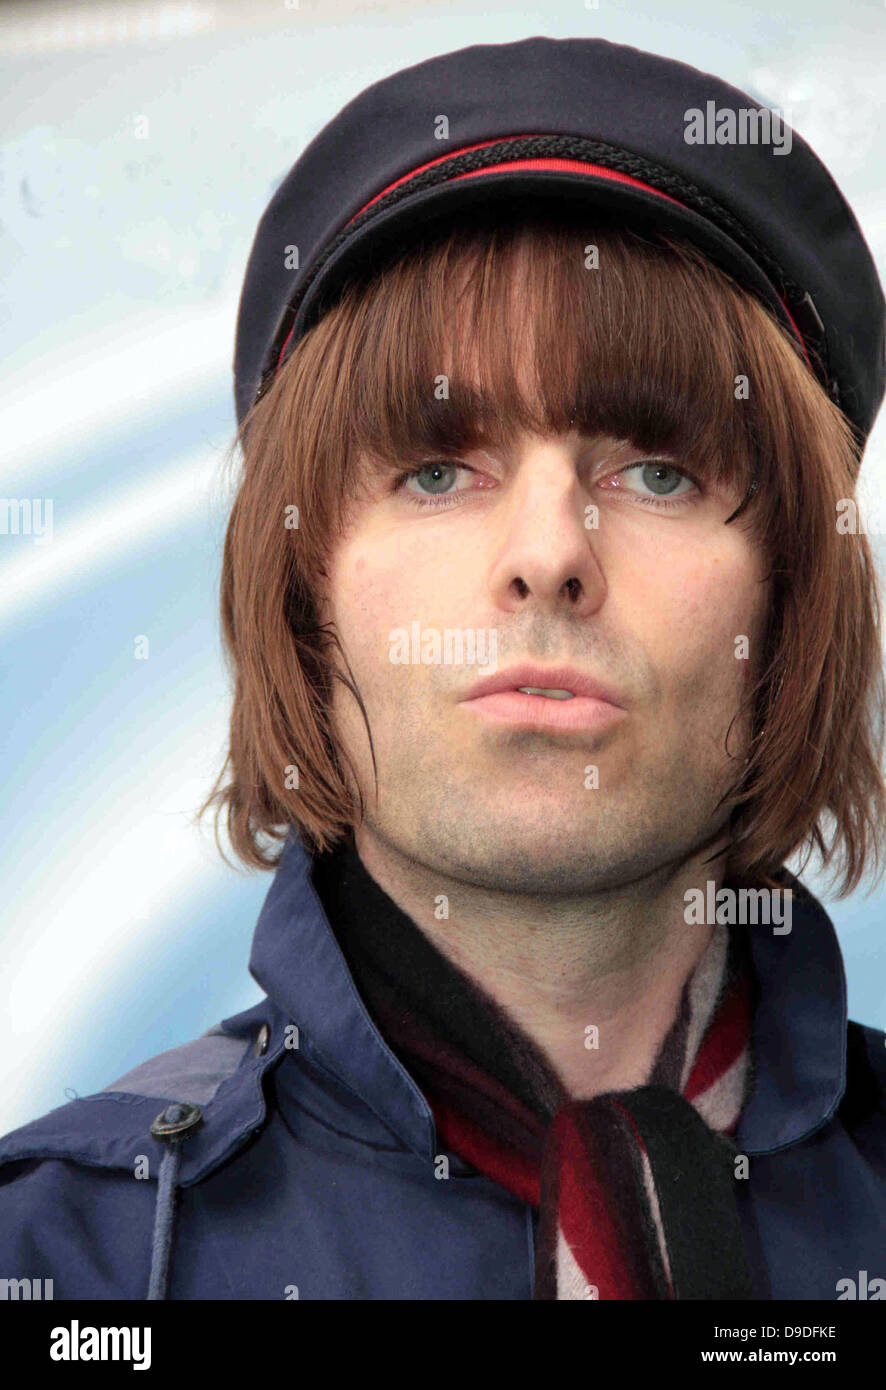 Liam Gallagher Beady Eye appear on Italian TV show 'Top of the Pops' Milan,  Italy - 28.03.11 Stock Photo - Alamy